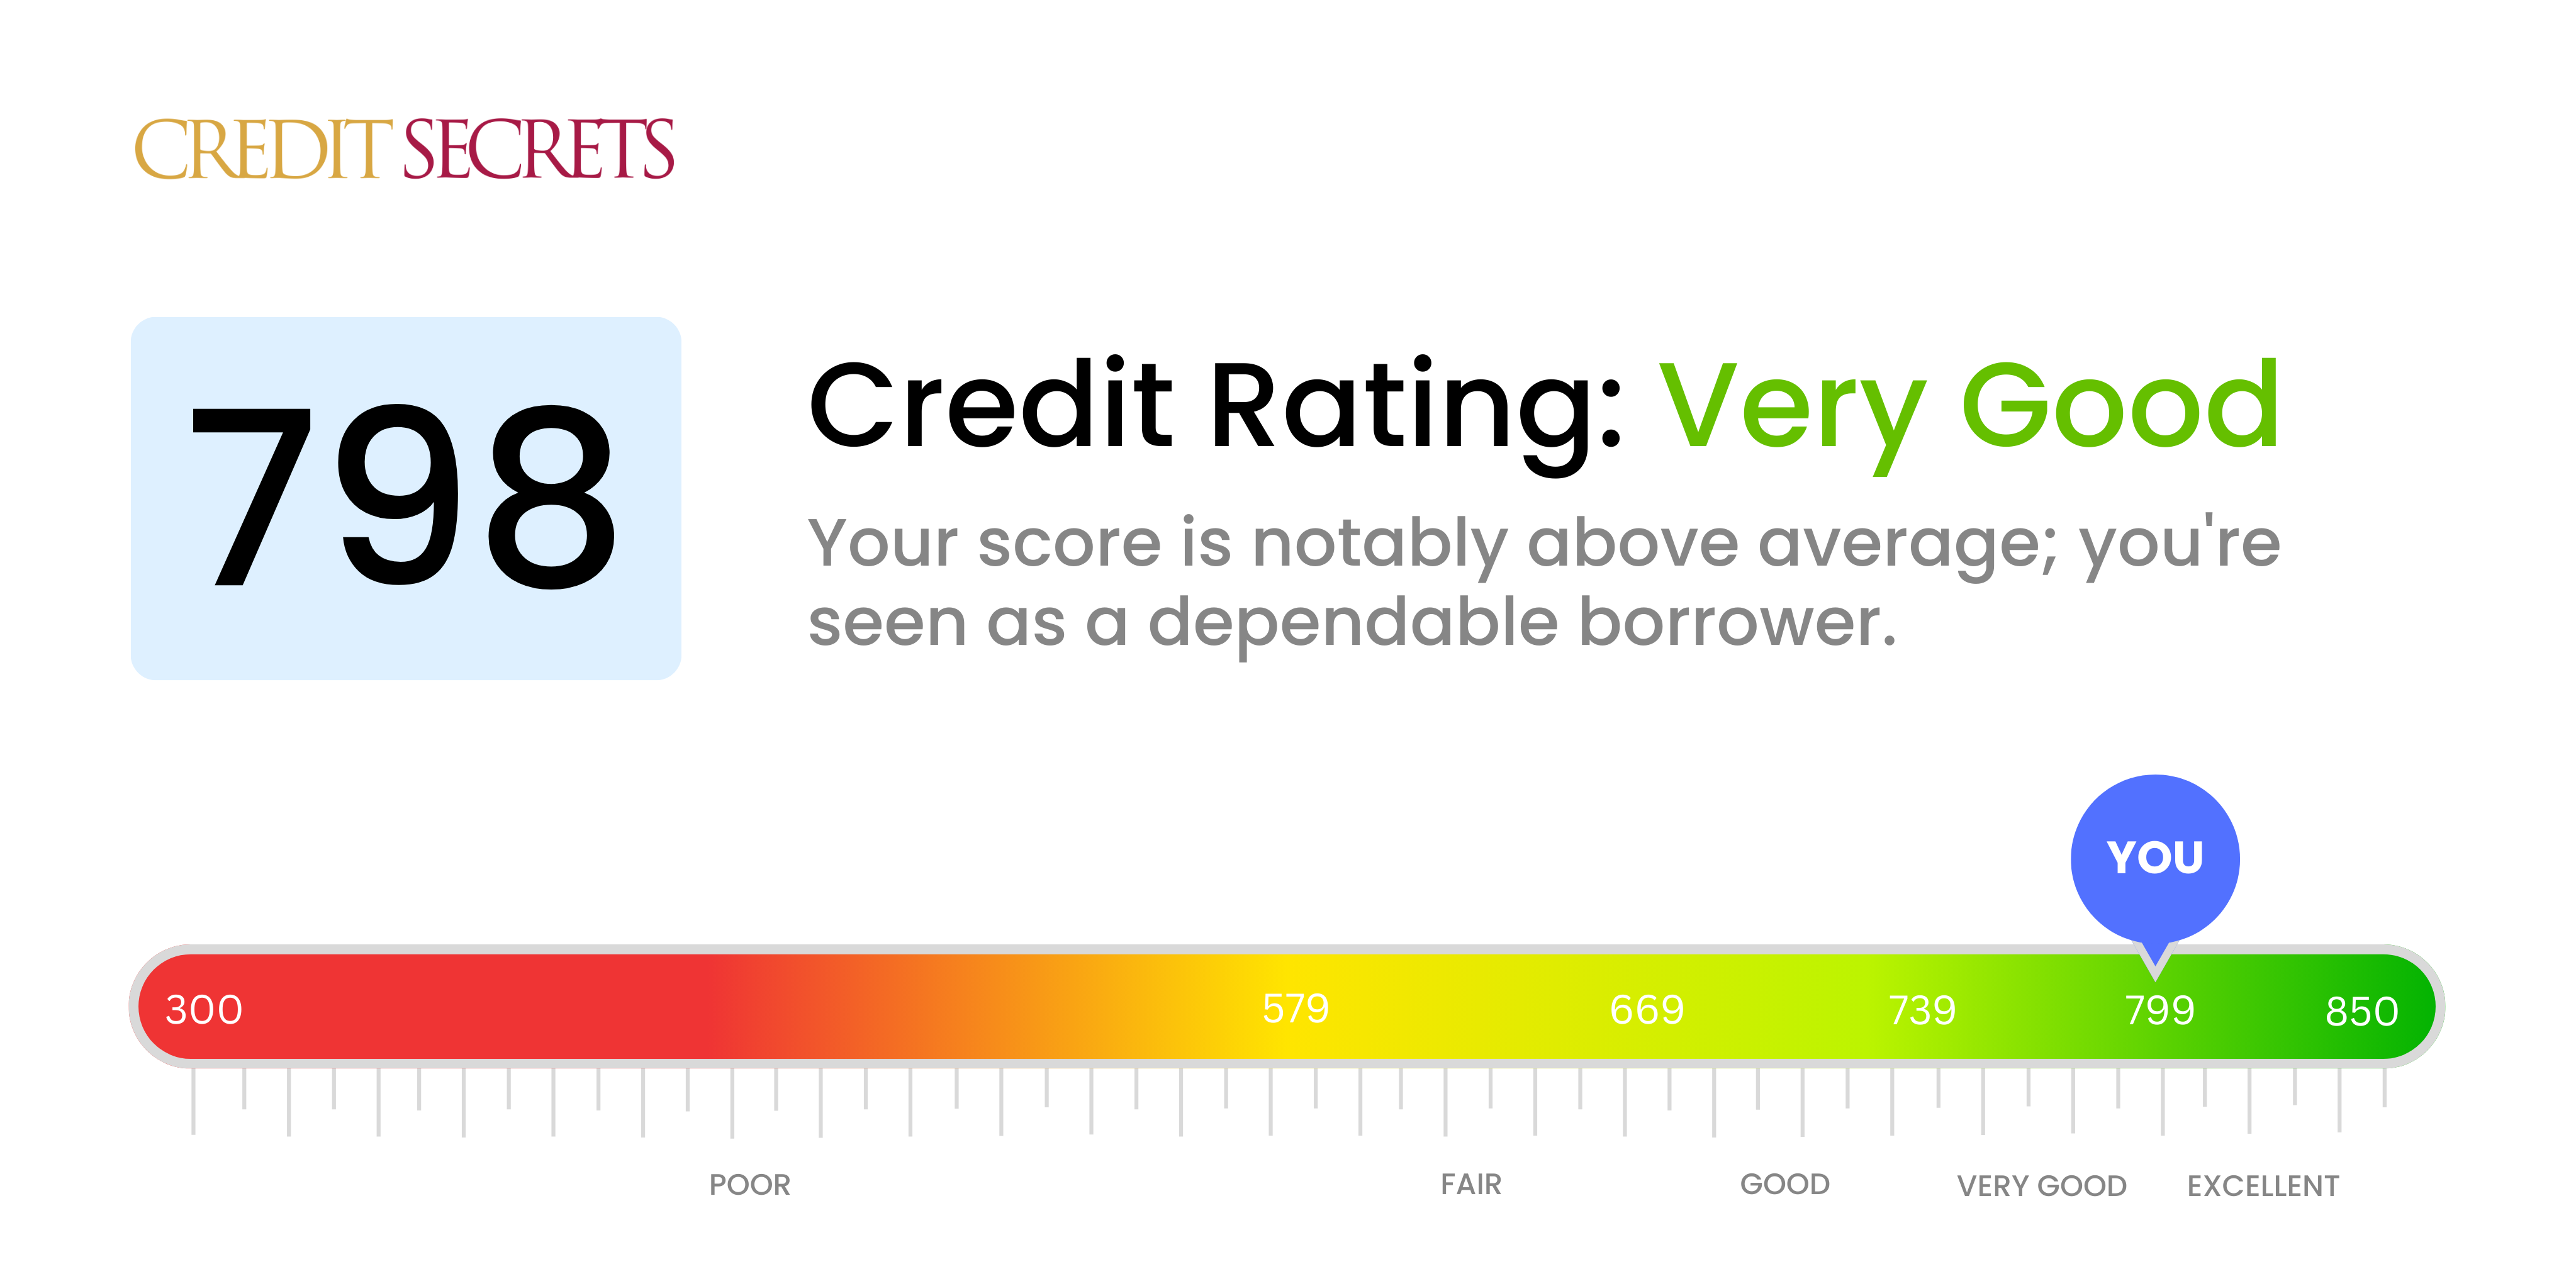 Is 798 a good credit score?